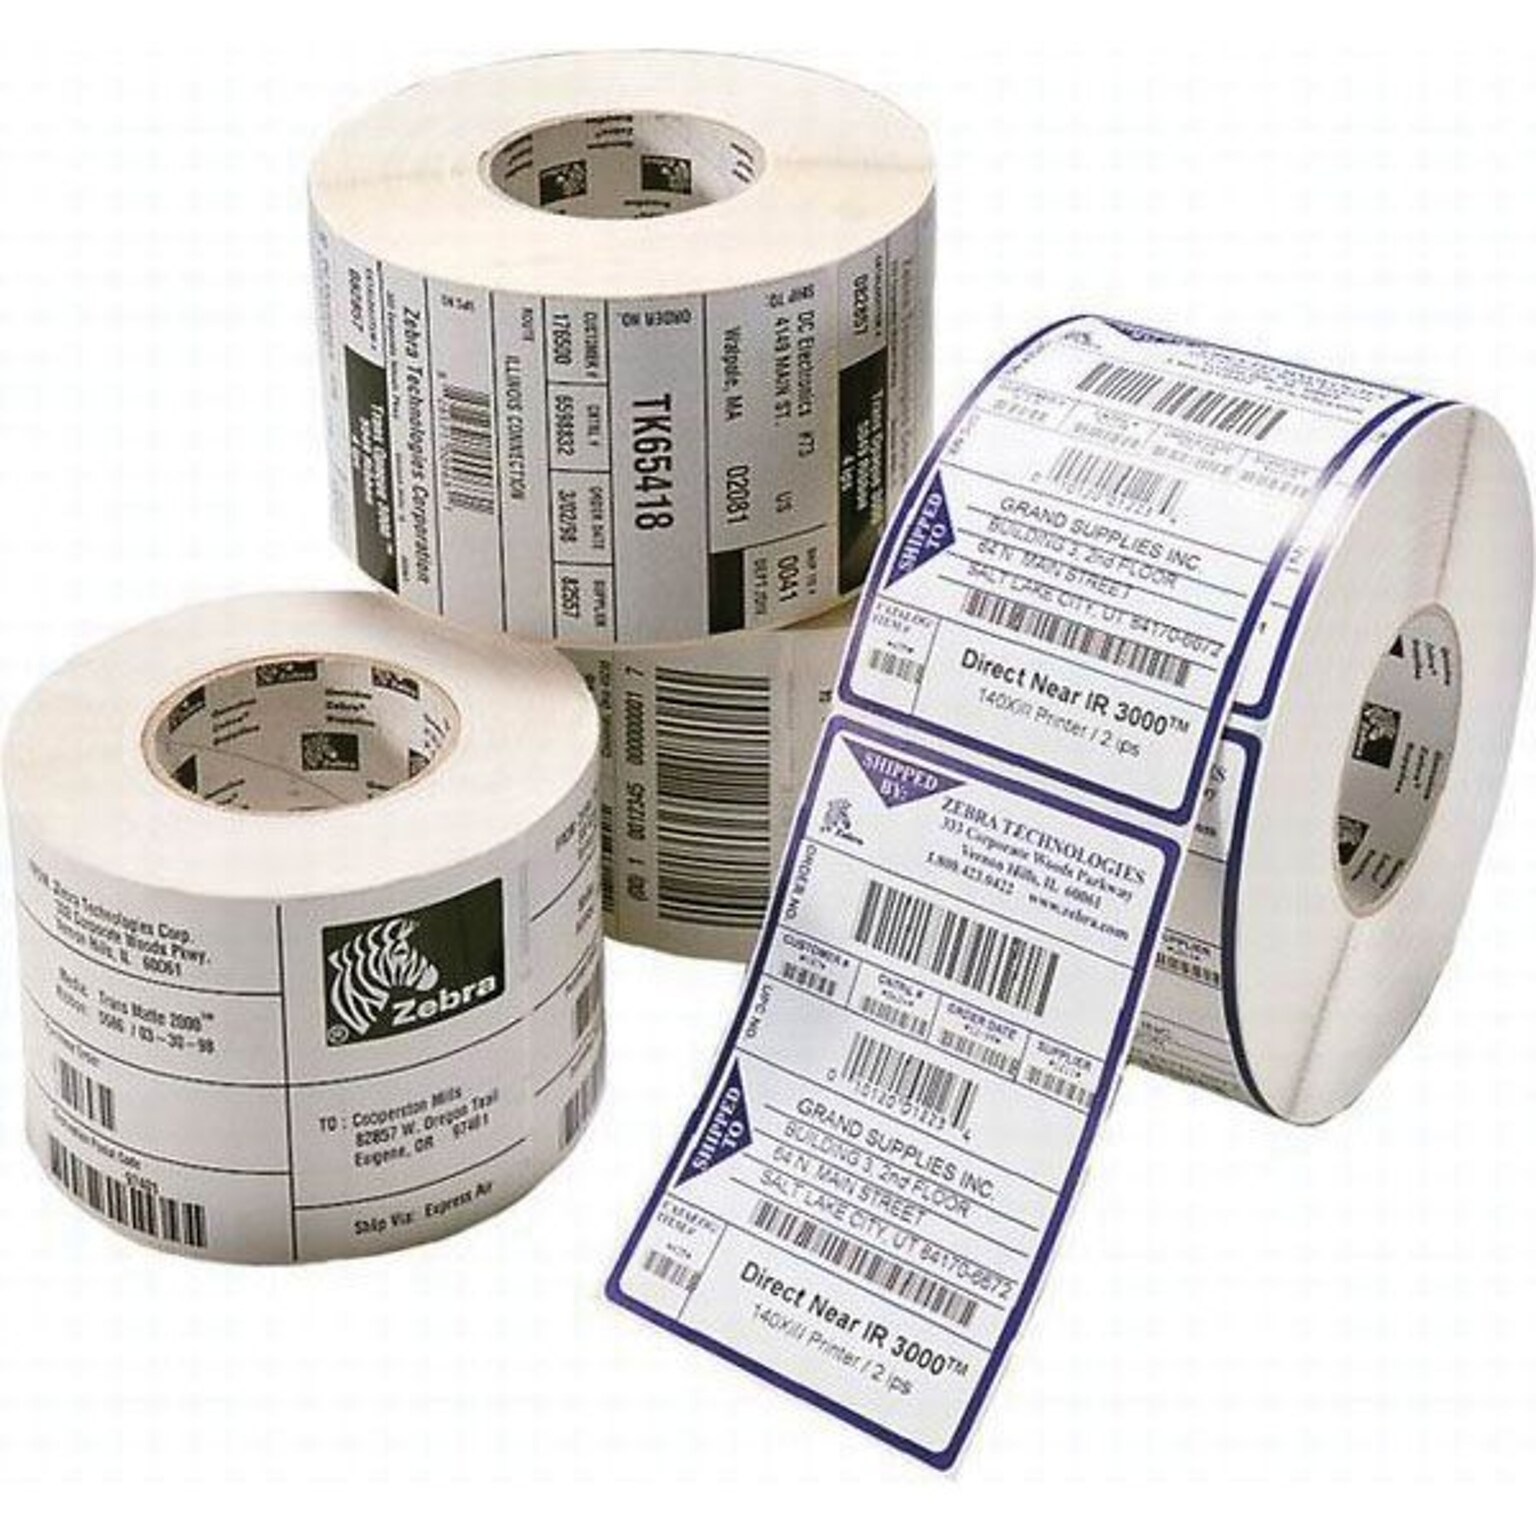 Zebra Z-Select 4000T Thermal Transfer Paper Labels, 2-3/4 x 1-1/4, White, 1,850 Labels/Roll, 4 Rolls/Pack (83260)